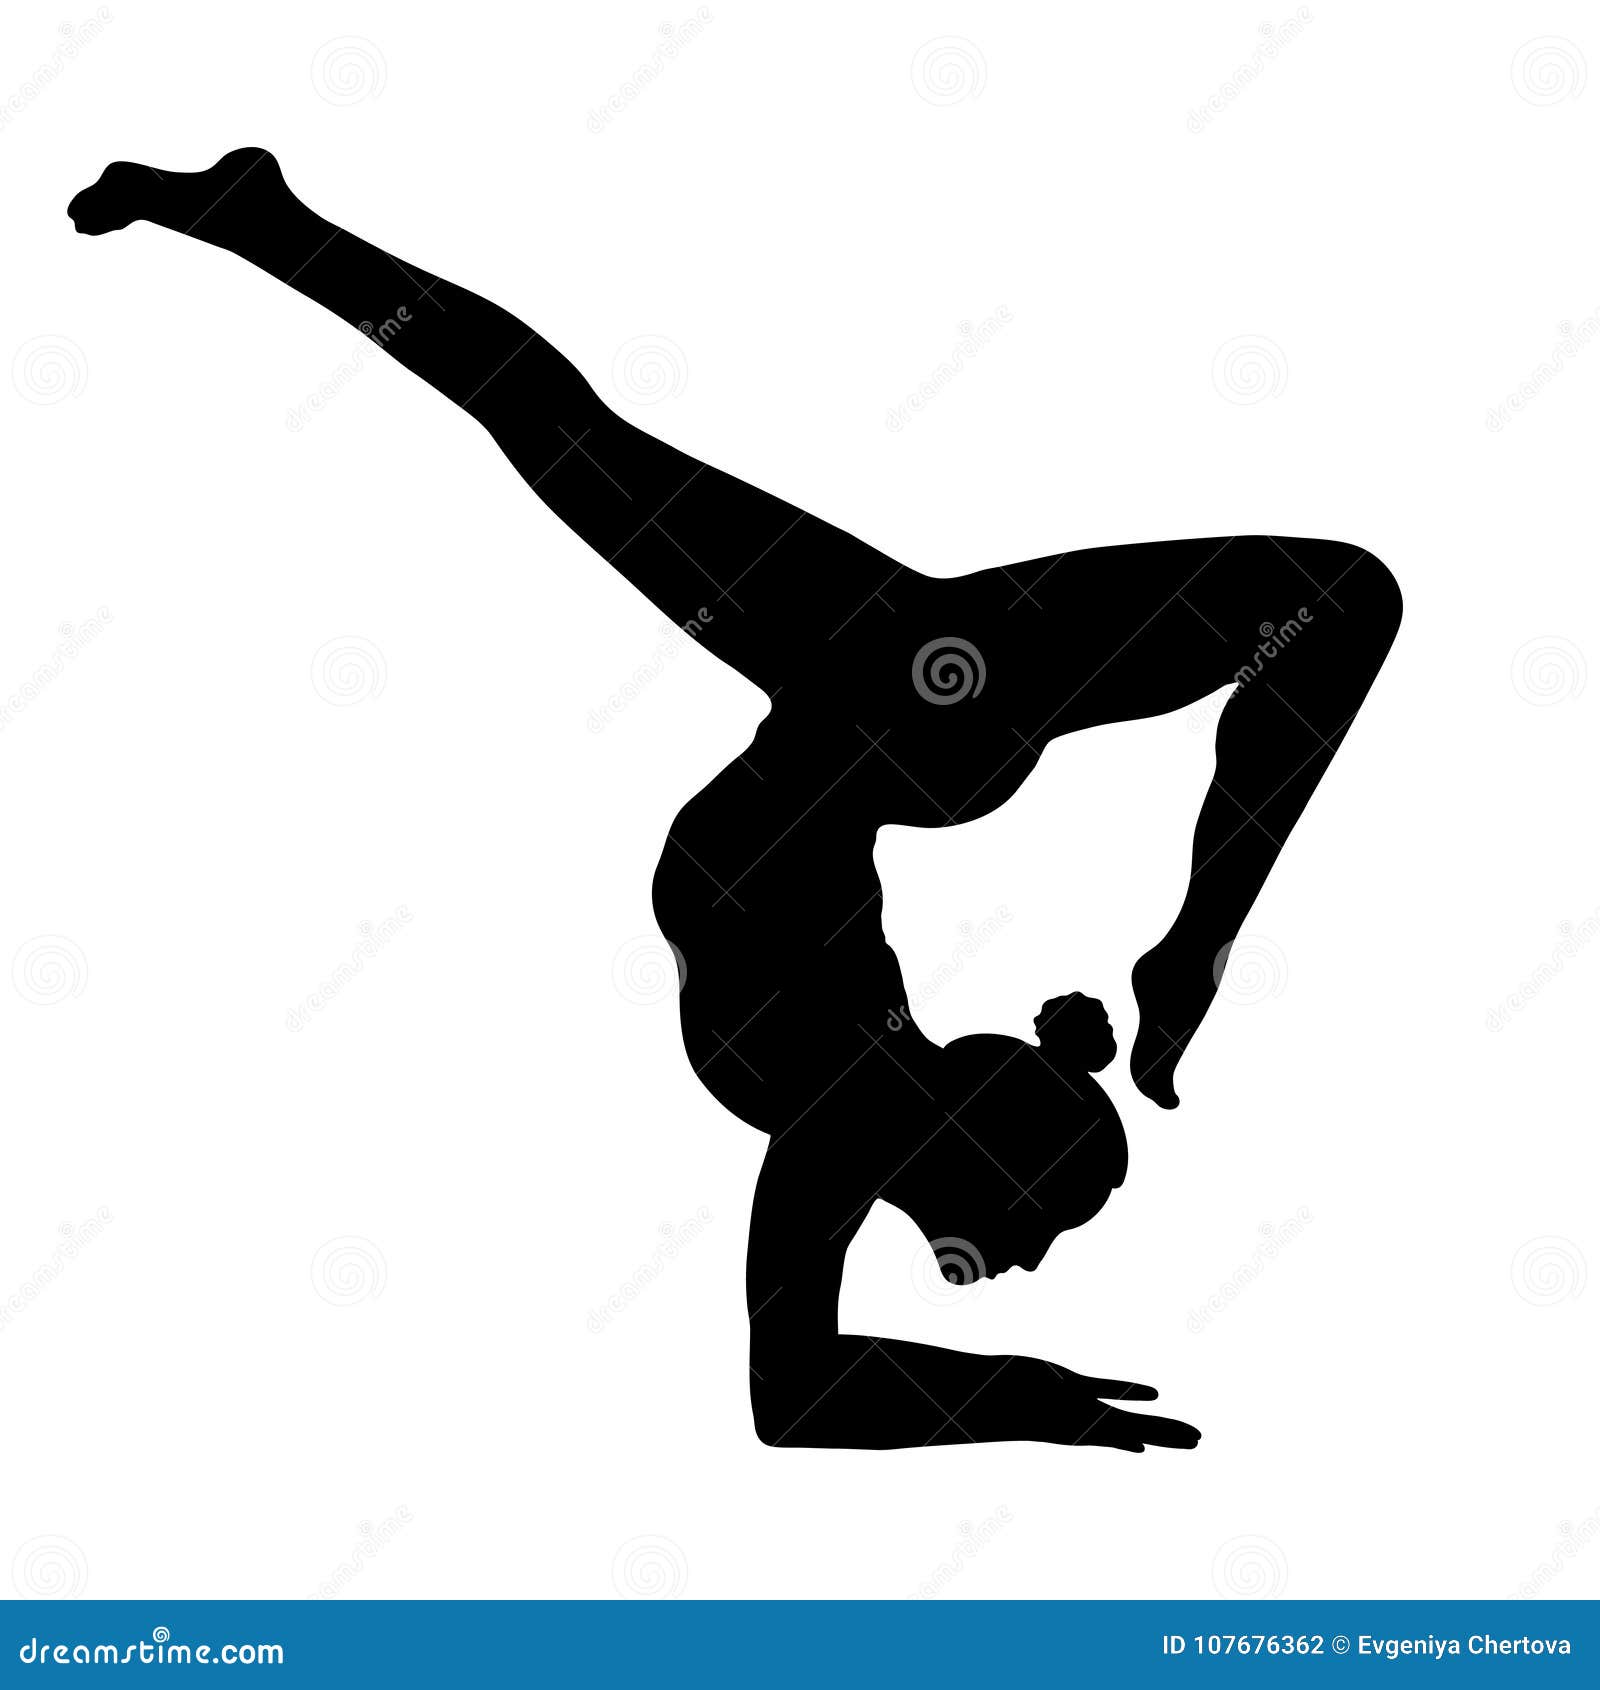 Yoga pose, woman handstand silhouette, vector outline portrait, gymnast figure, black and white contour drawing. Isolated on white